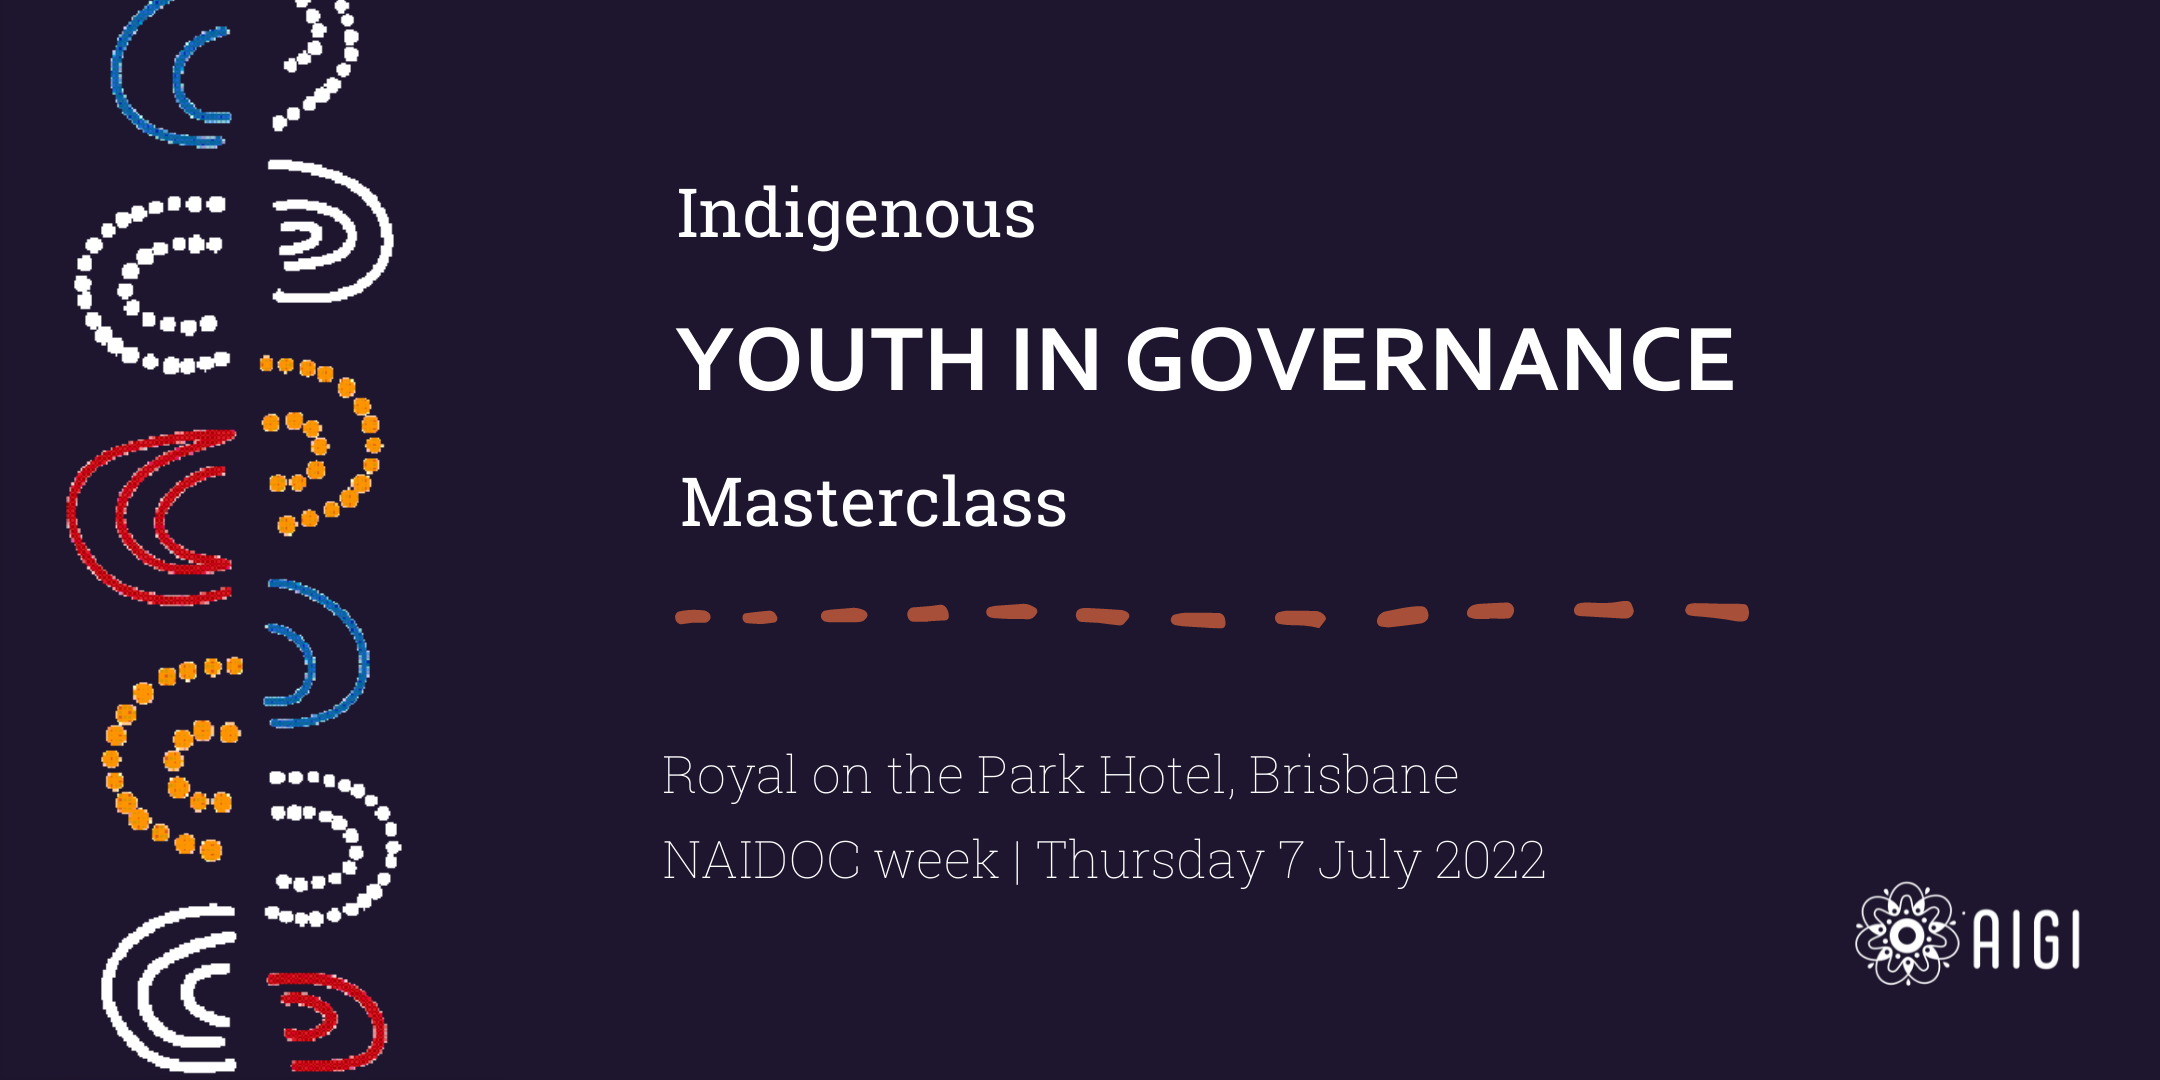 Indigenous Youth in Governance Masterclass